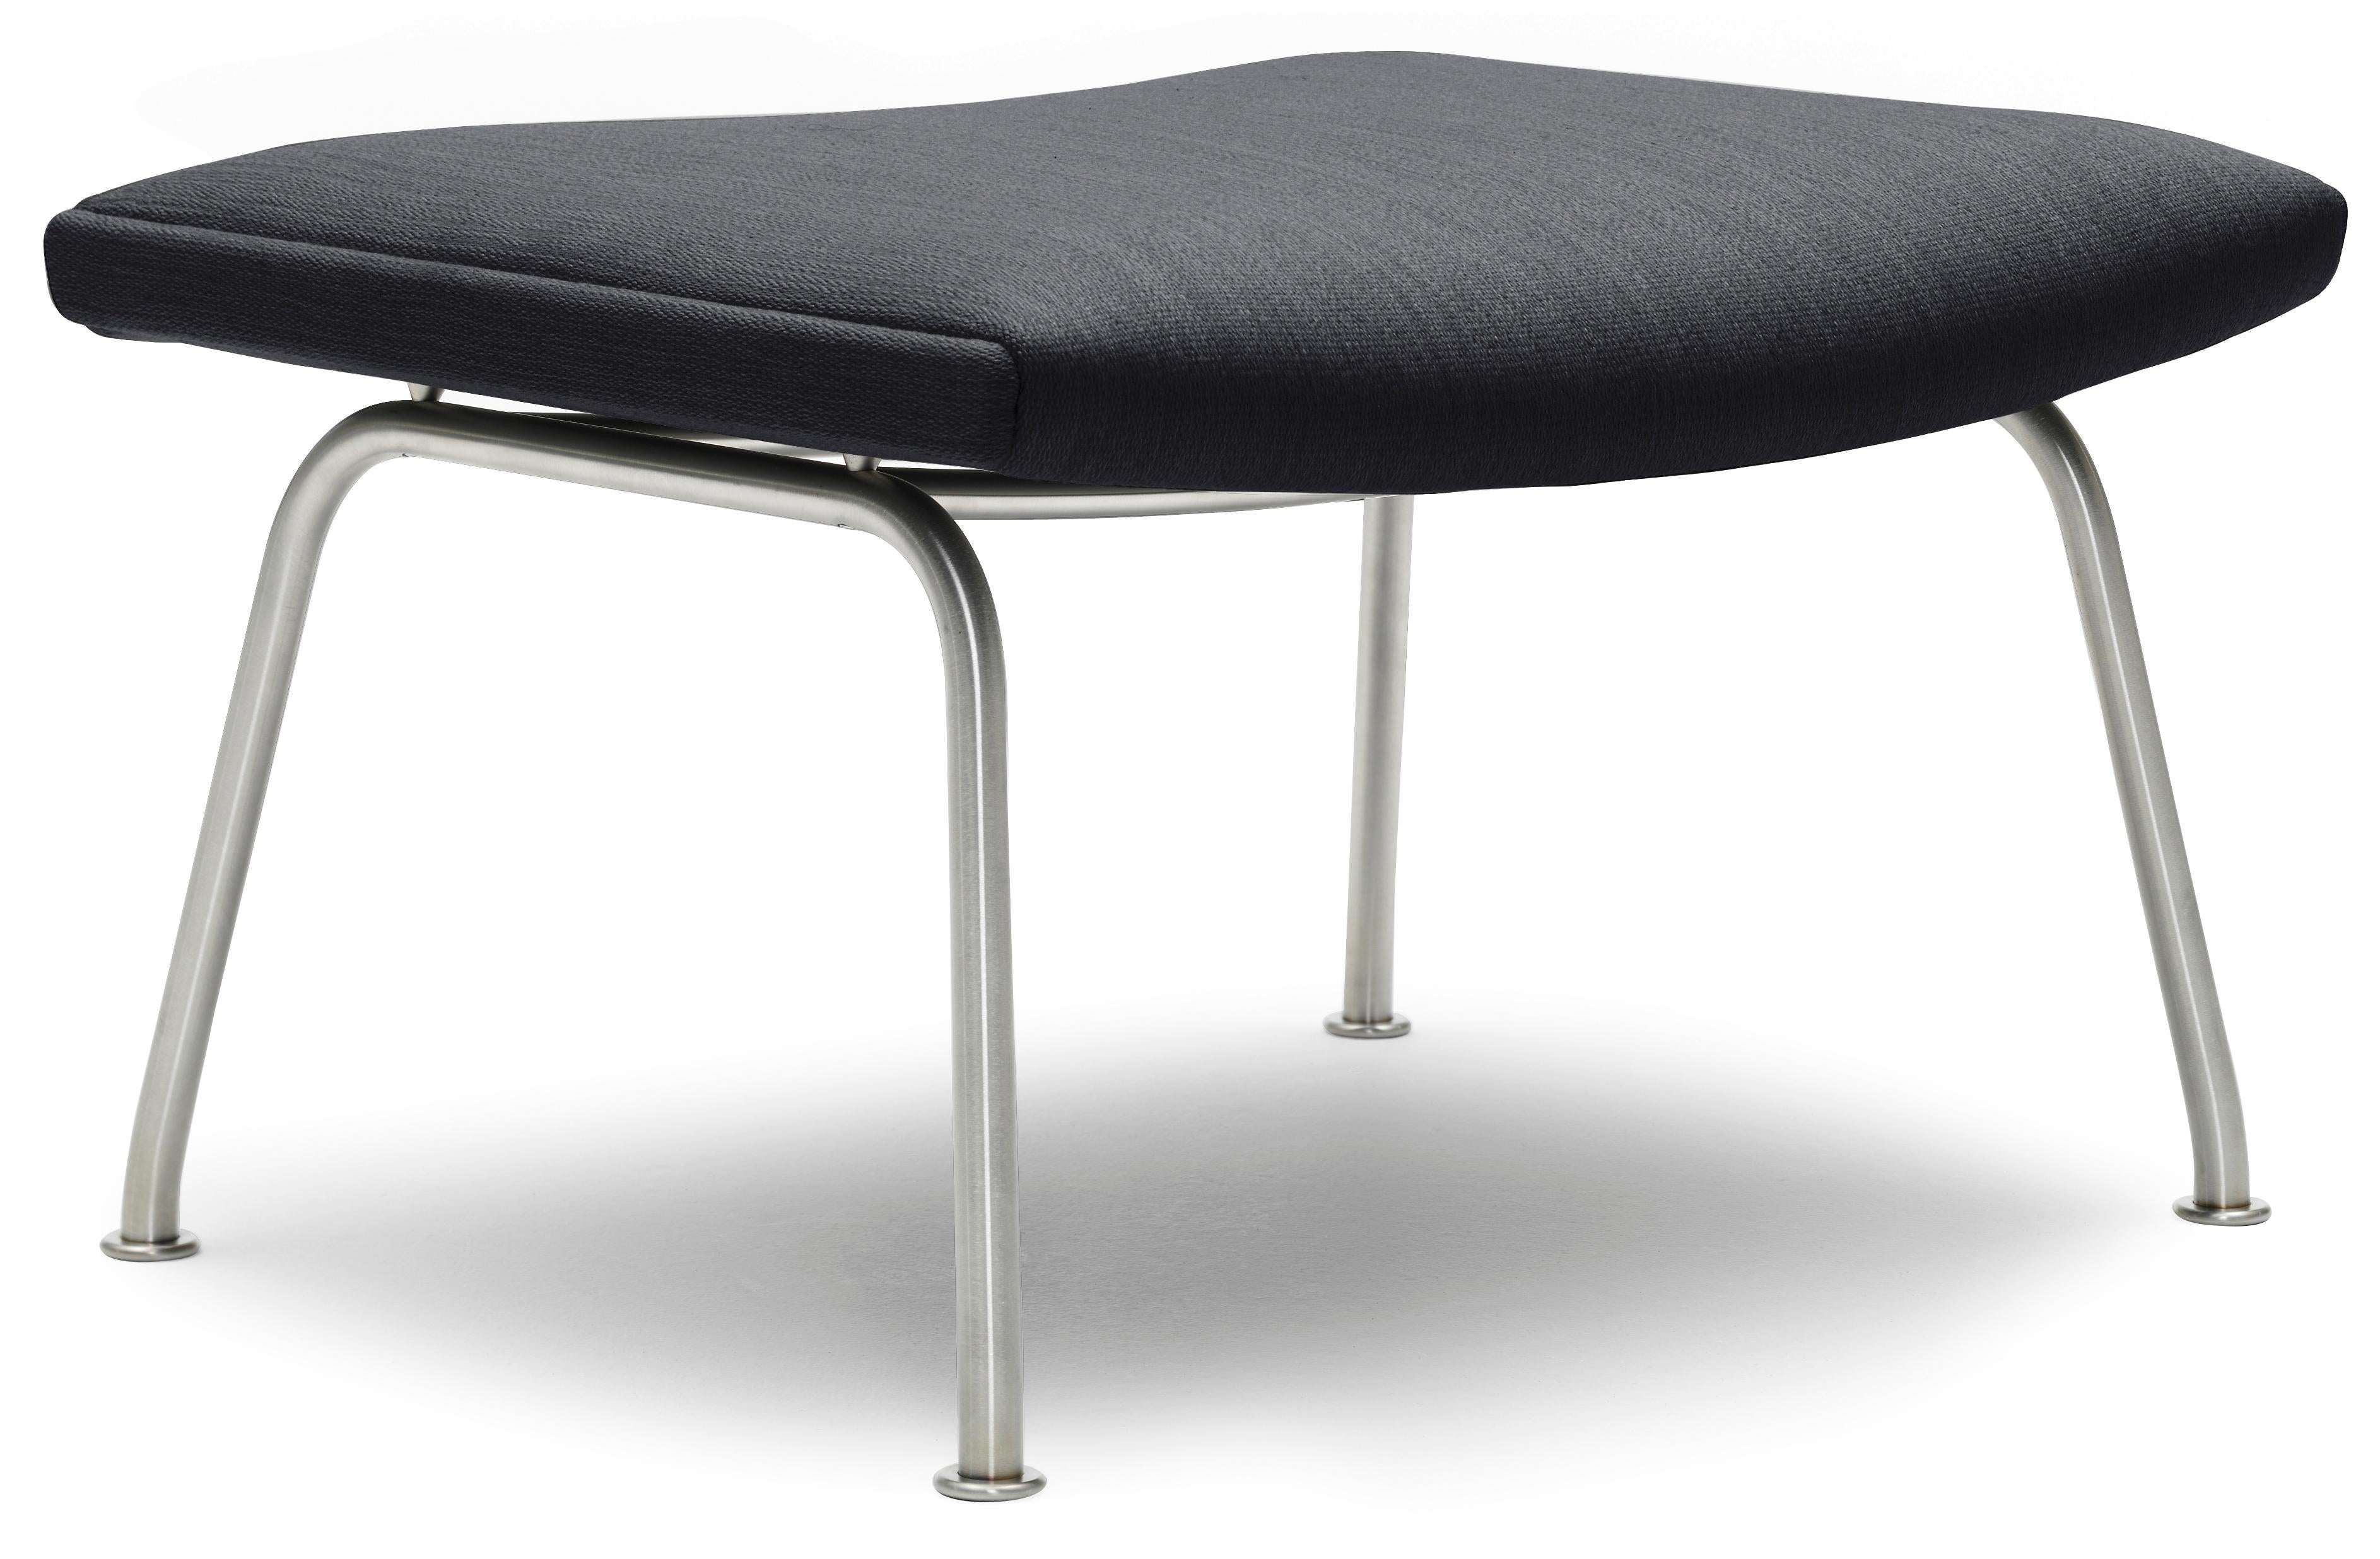 Black (Kvadrat Fiord 191) CH446 Footrest in Stainless Steel with Fabric Seat by Hans J. Wegner